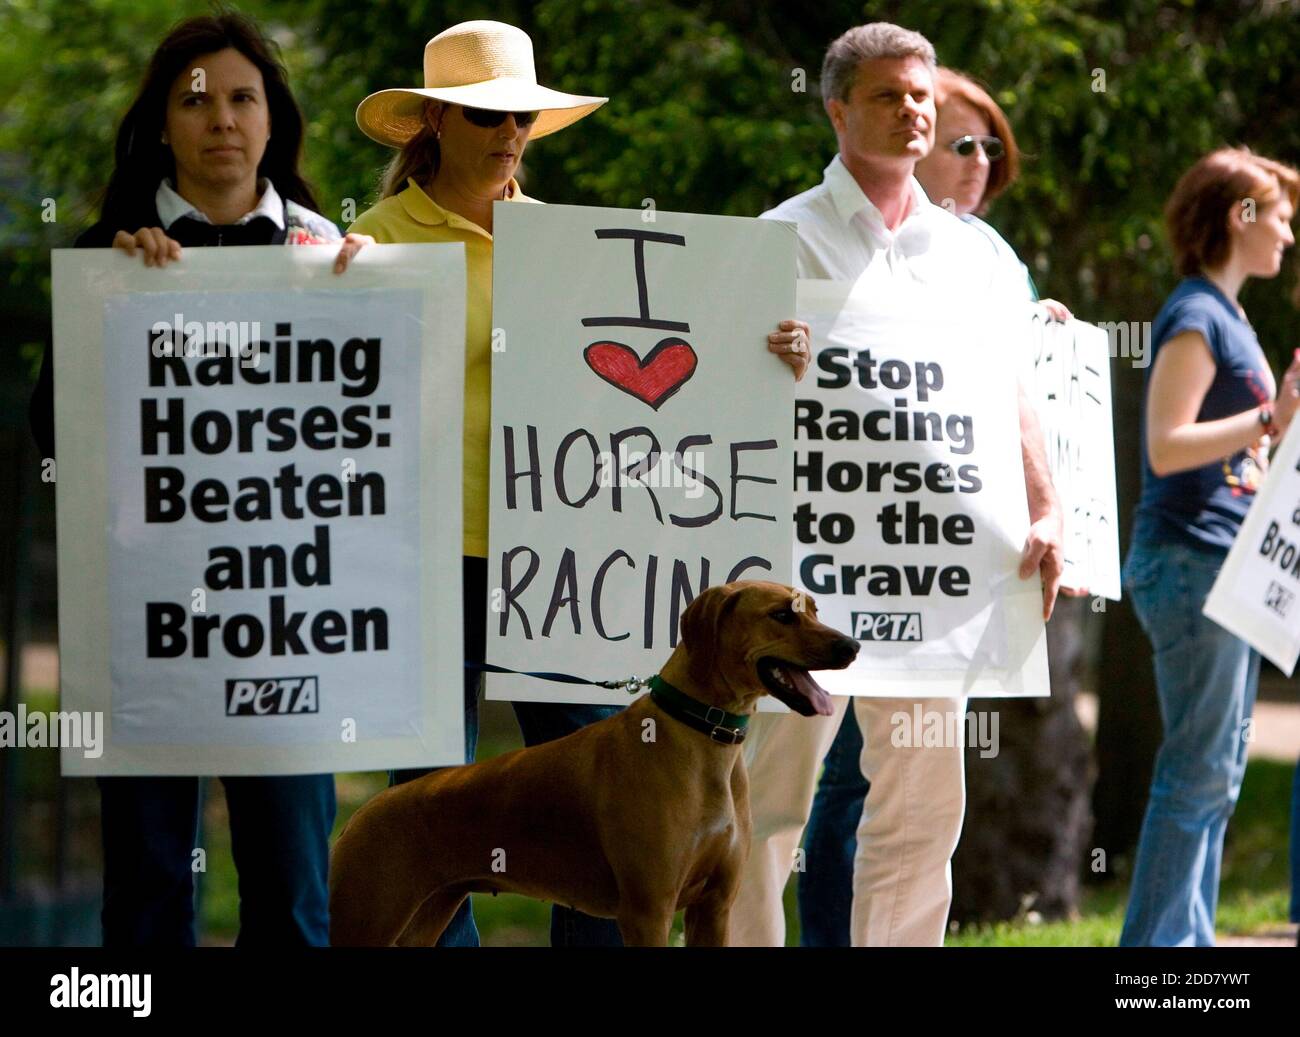 NO FILM, NO VIDEO, NO TV, NO DOCUMENTARY - Protesters from PETA and supporters of the horse industry hold signs at the Kentucky Horse Racing Authority's headquarters in LLexington, KY, USA on May 6, 2008. PETA has urged the suspension of jockey Gabriel Saez for what it viewed as excessive whipping of Eight Belles during the Kentucky Derby. Photo by Jenn Ackerman/Lexington Herald-Leader/MCT/ABACAPRESS.COM Stock Photo